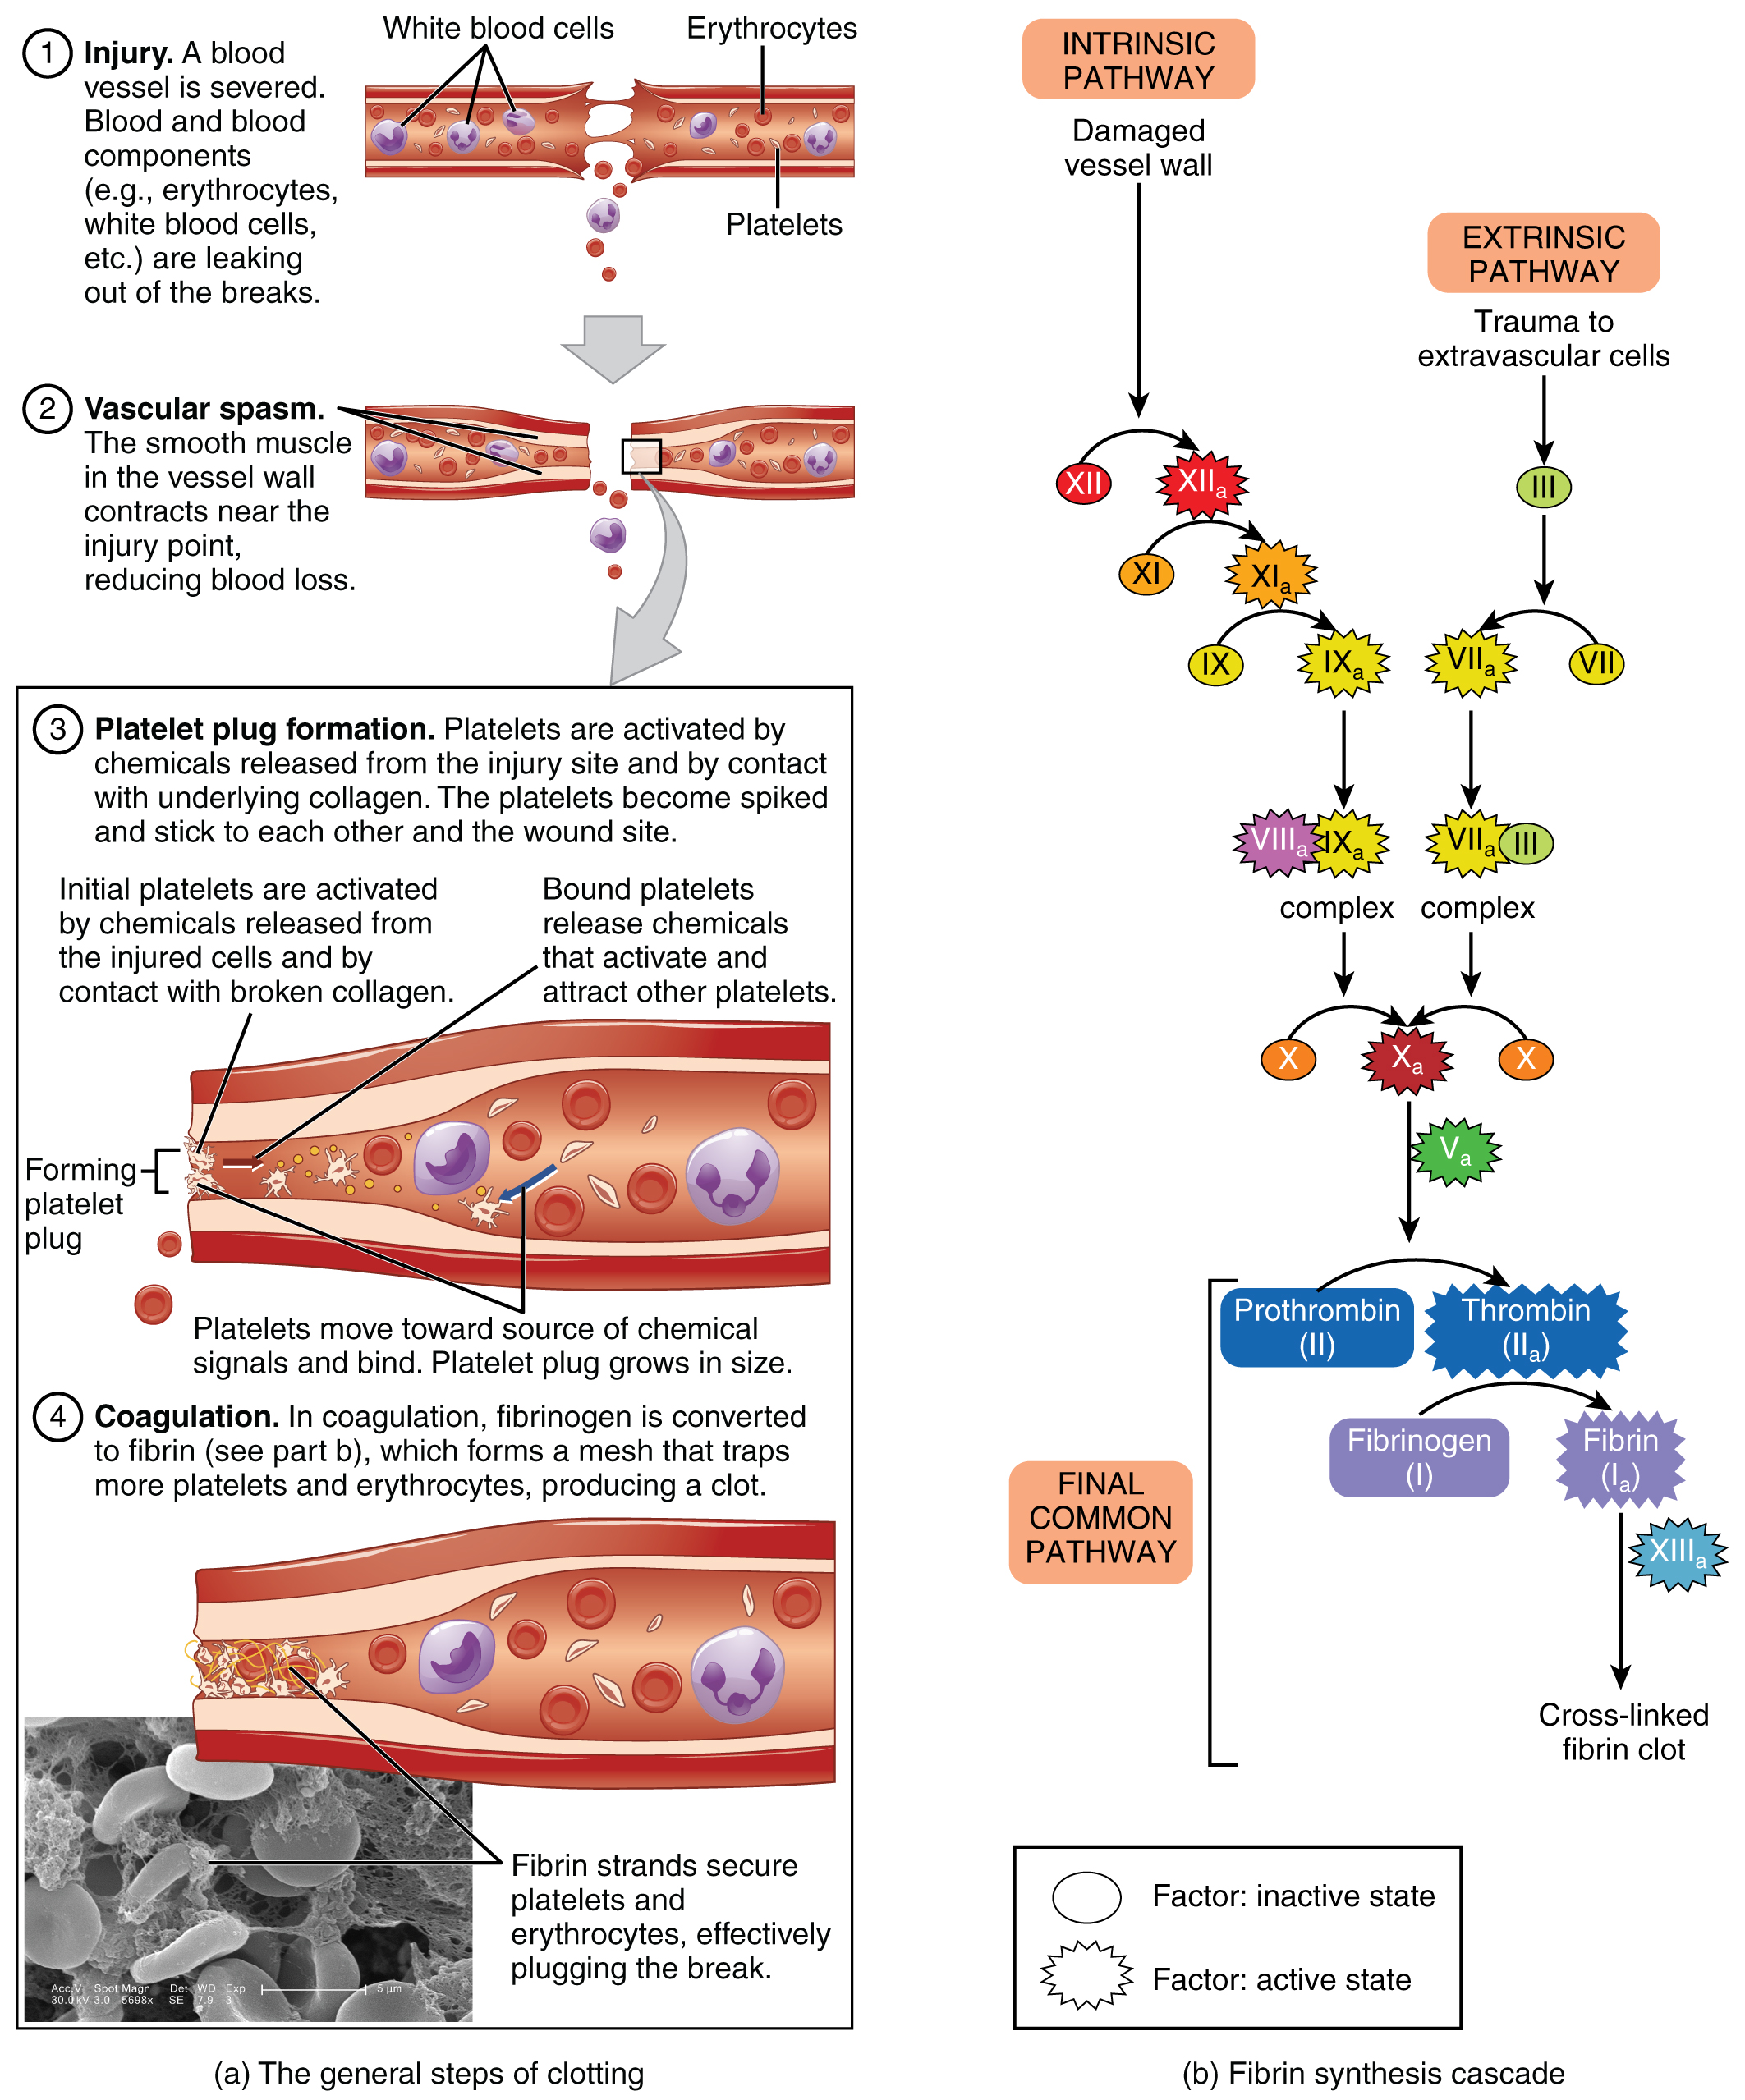 This figure details the steps in the clotting of blood. Each step is shown along with a detailed text box describing the steps on the left. On the right, a signaling pathway shows the different chemical signals involved in the clotting process.